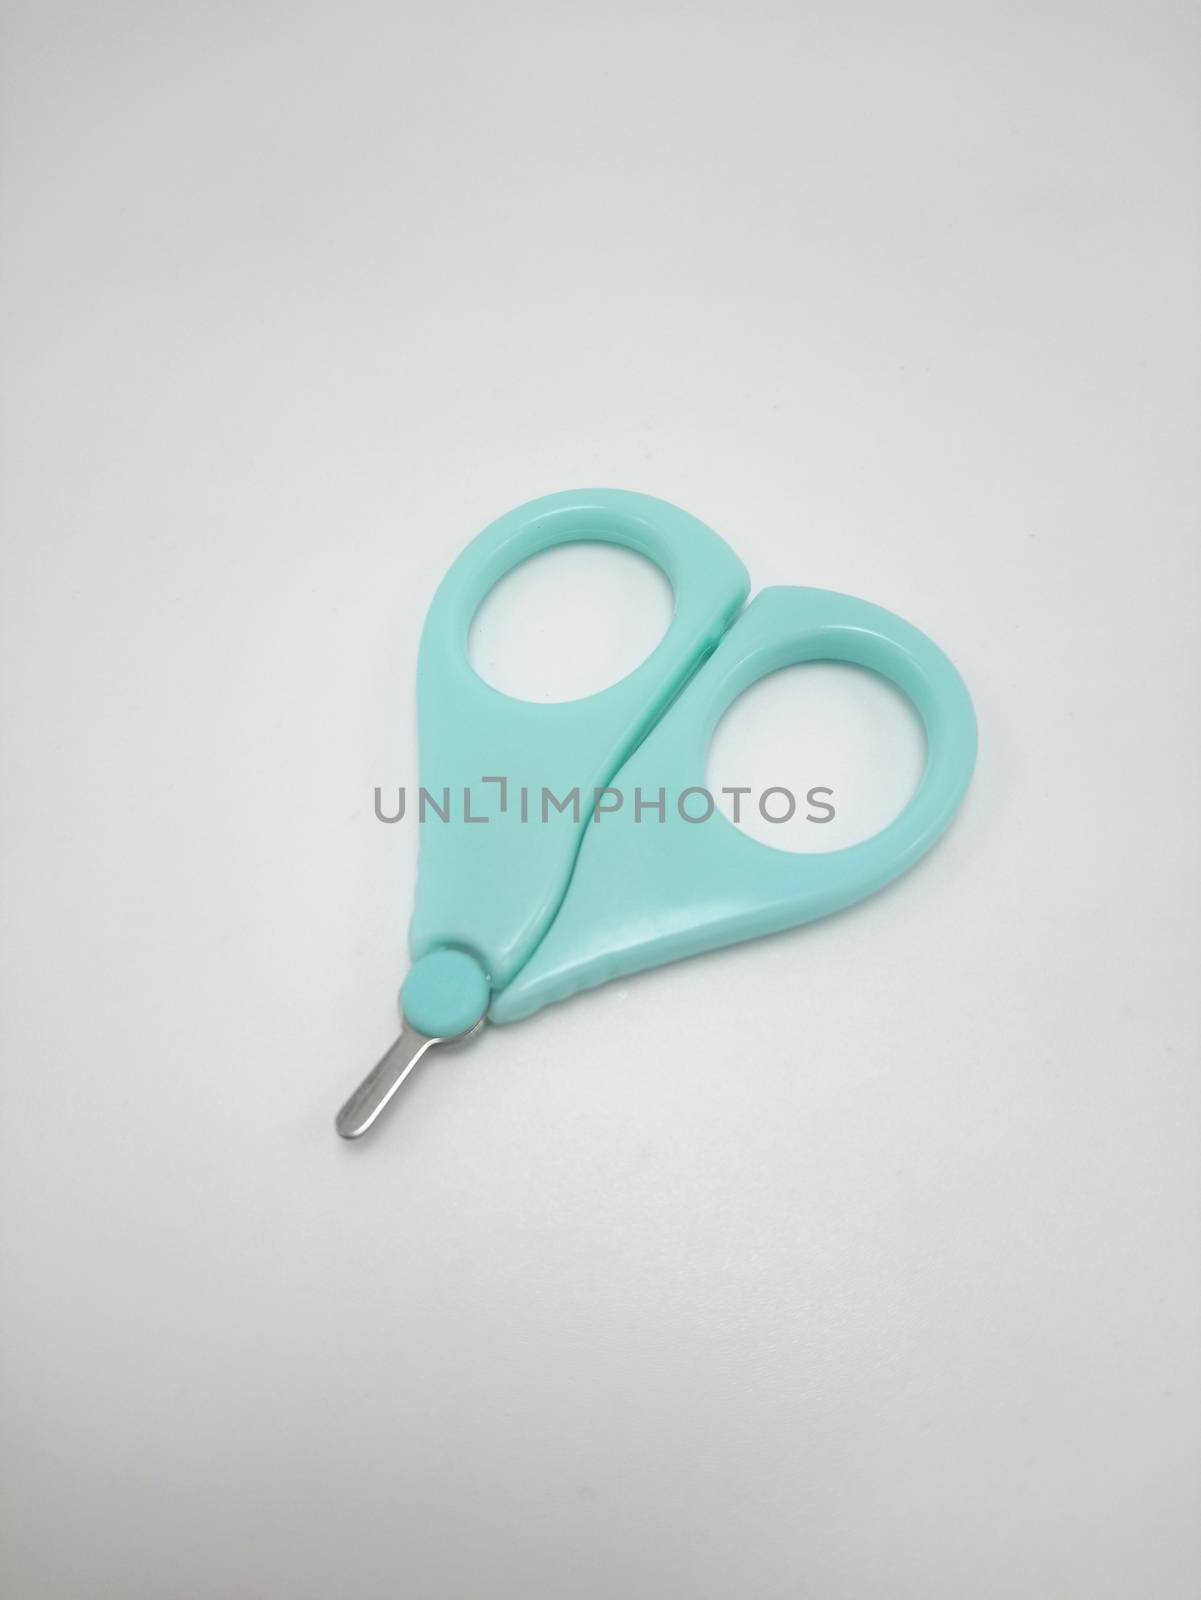 Small handy baby nail scissors use to cut finger nails